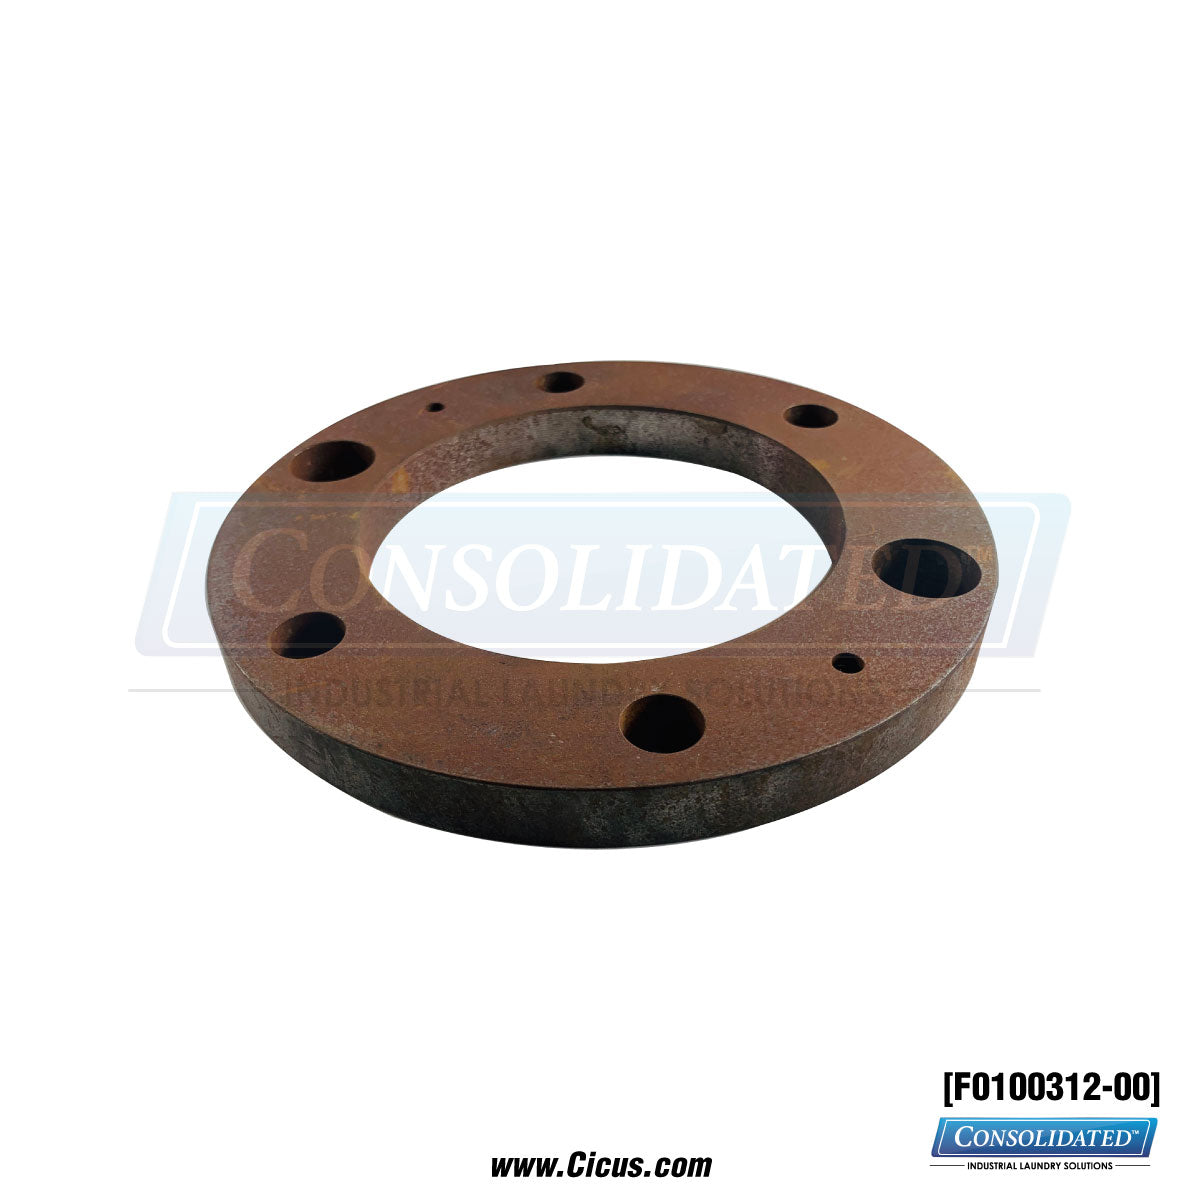 Alliance Laundry Systems Alignment Shaft Seal [F0100312-00].